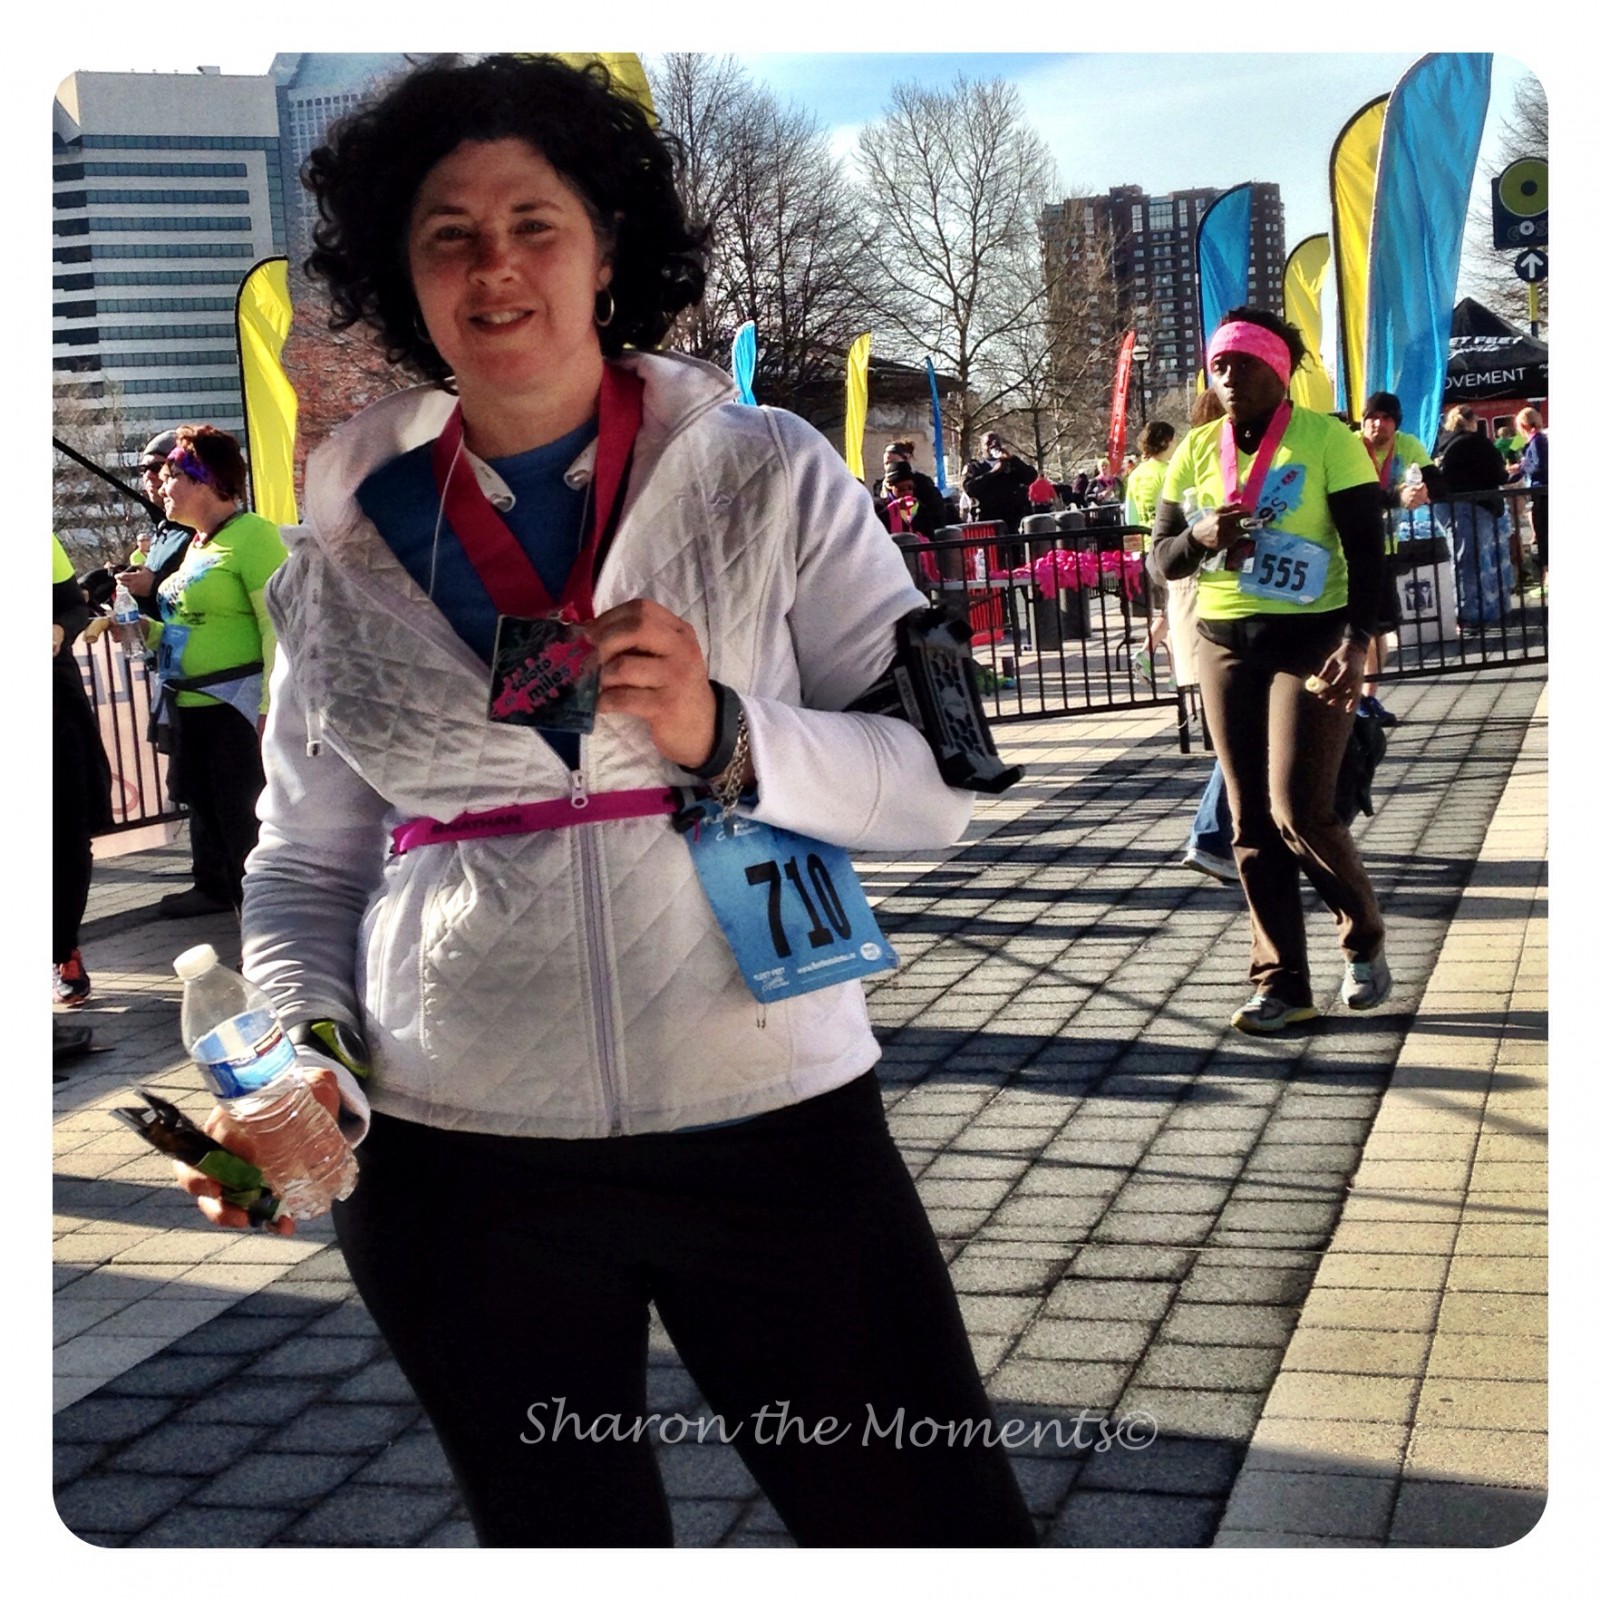 The Running Regiment Continues into the Spring Scioto Miles 5K|Sharon the Moments Blog